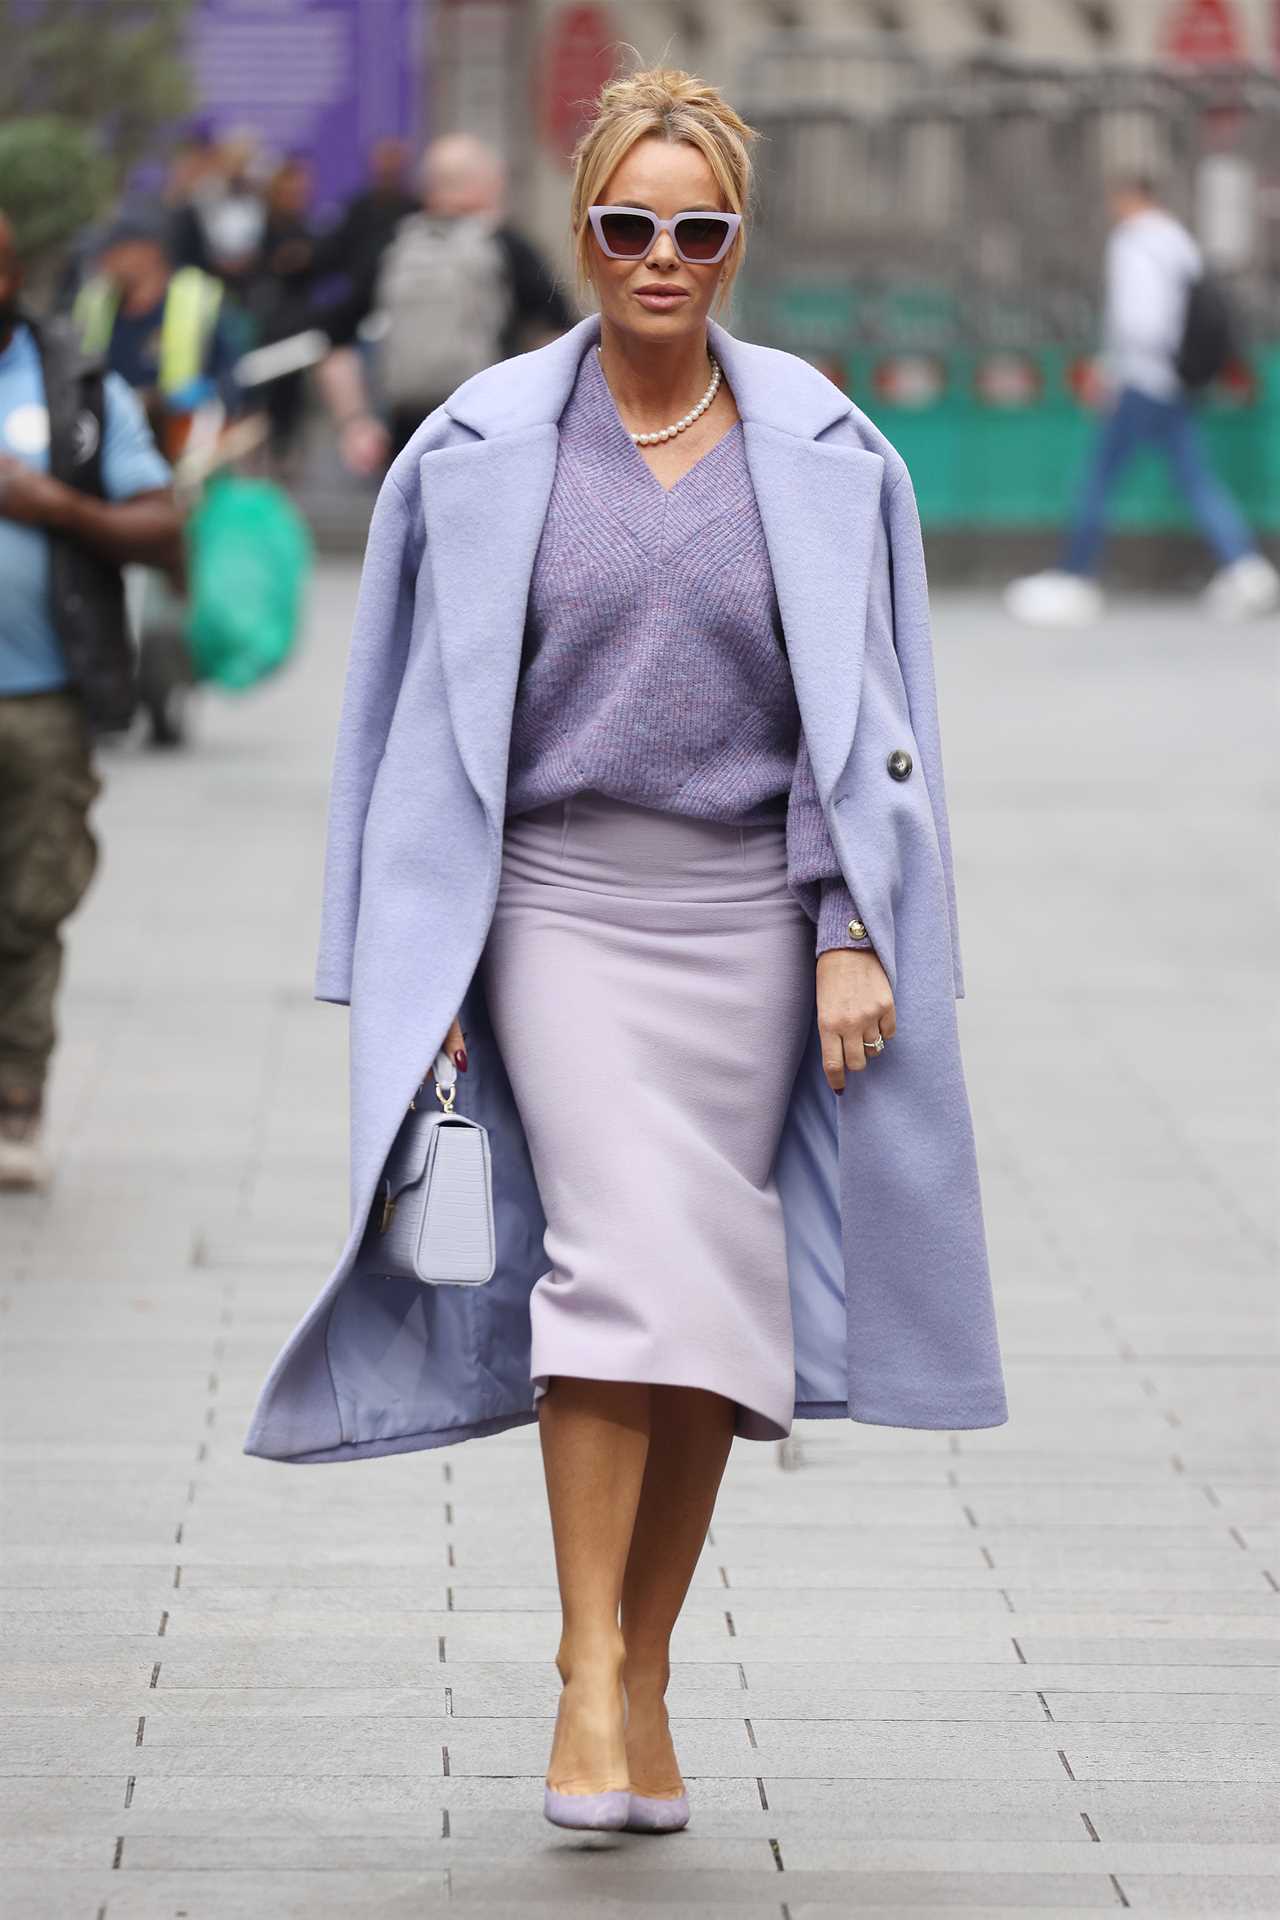 Amanda Holden goes braless in chic lilac outfit as she leaves work in London